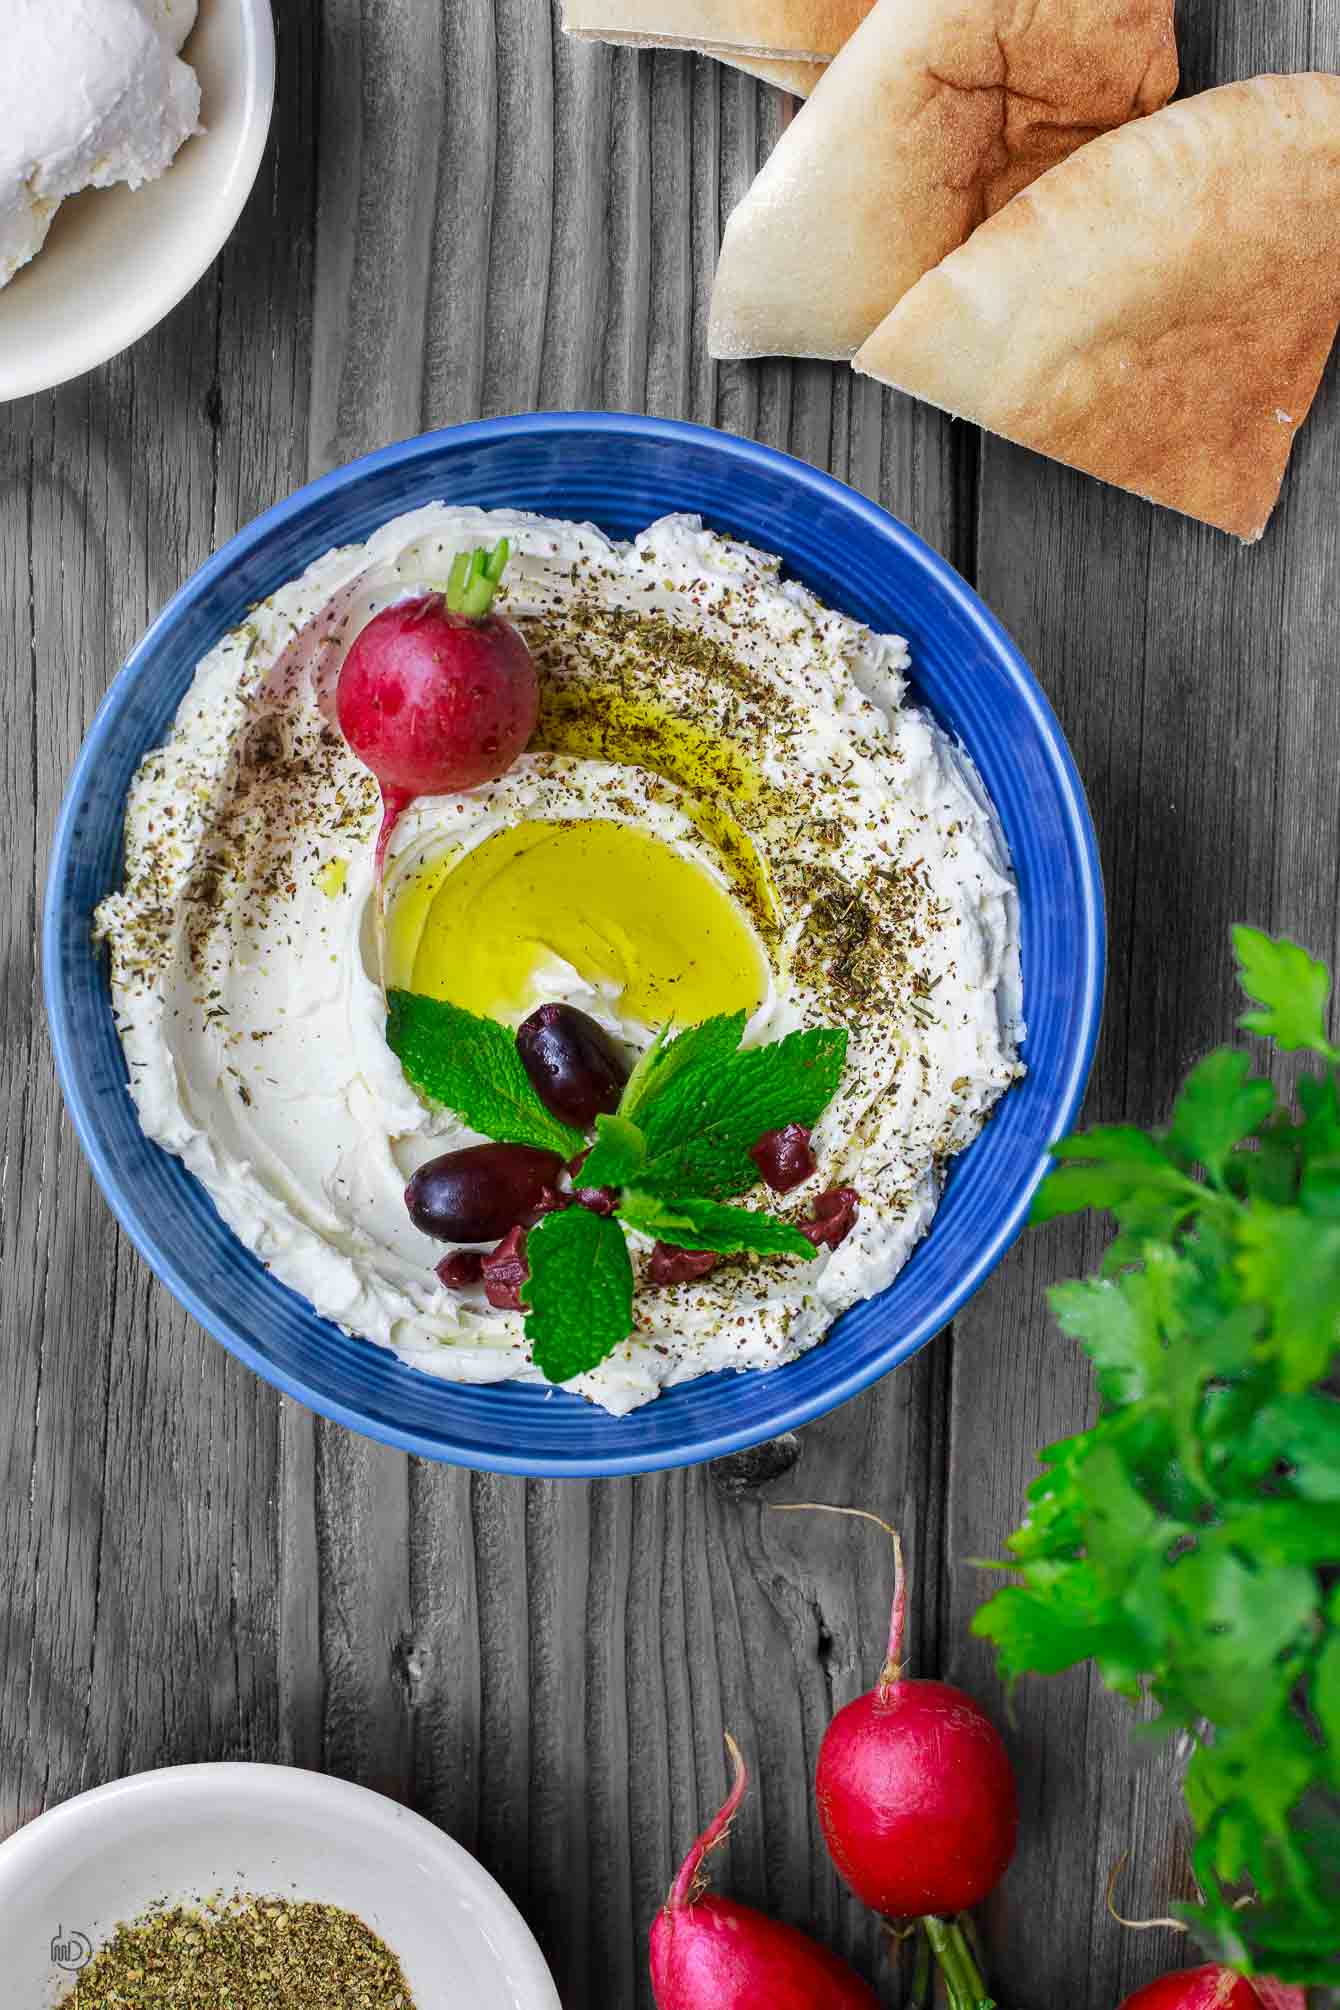 Homemade Labneh Recipe | The Mediterranean Dish. Homemade labneh, Middle Eastern yogurt cheese that is tangy, creamy and lighter than your average cream cheese. Use it as mezze or to spread on your favorite bread. Versatile and super easy to make! A two-step recipe from TheMediterraneanDish.com